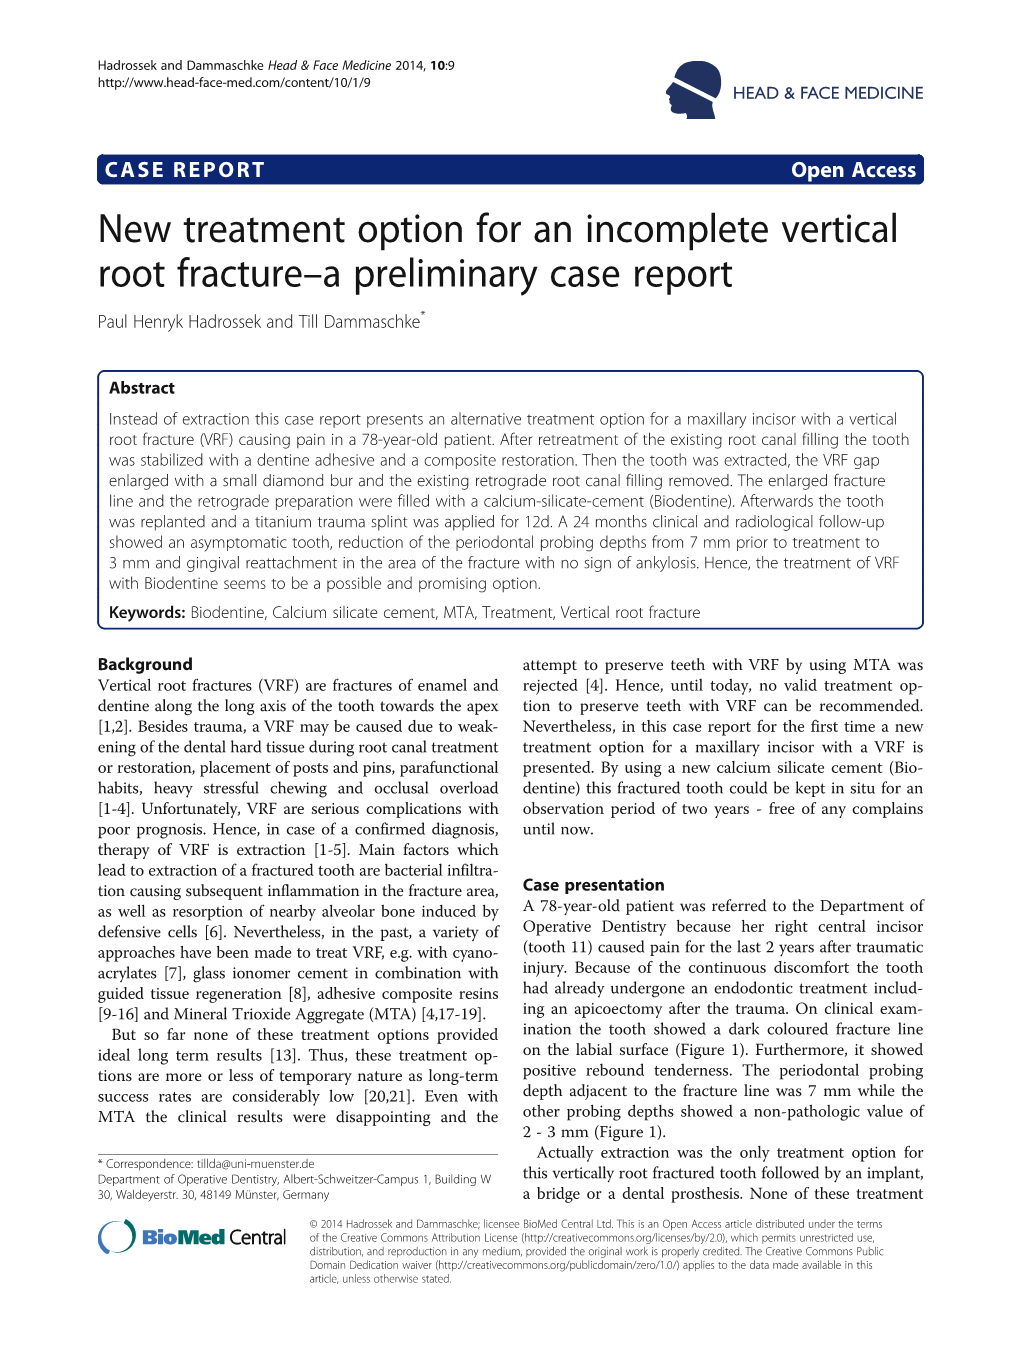 New Treatment Option for an Incomplete Vertical Root Fracture-A